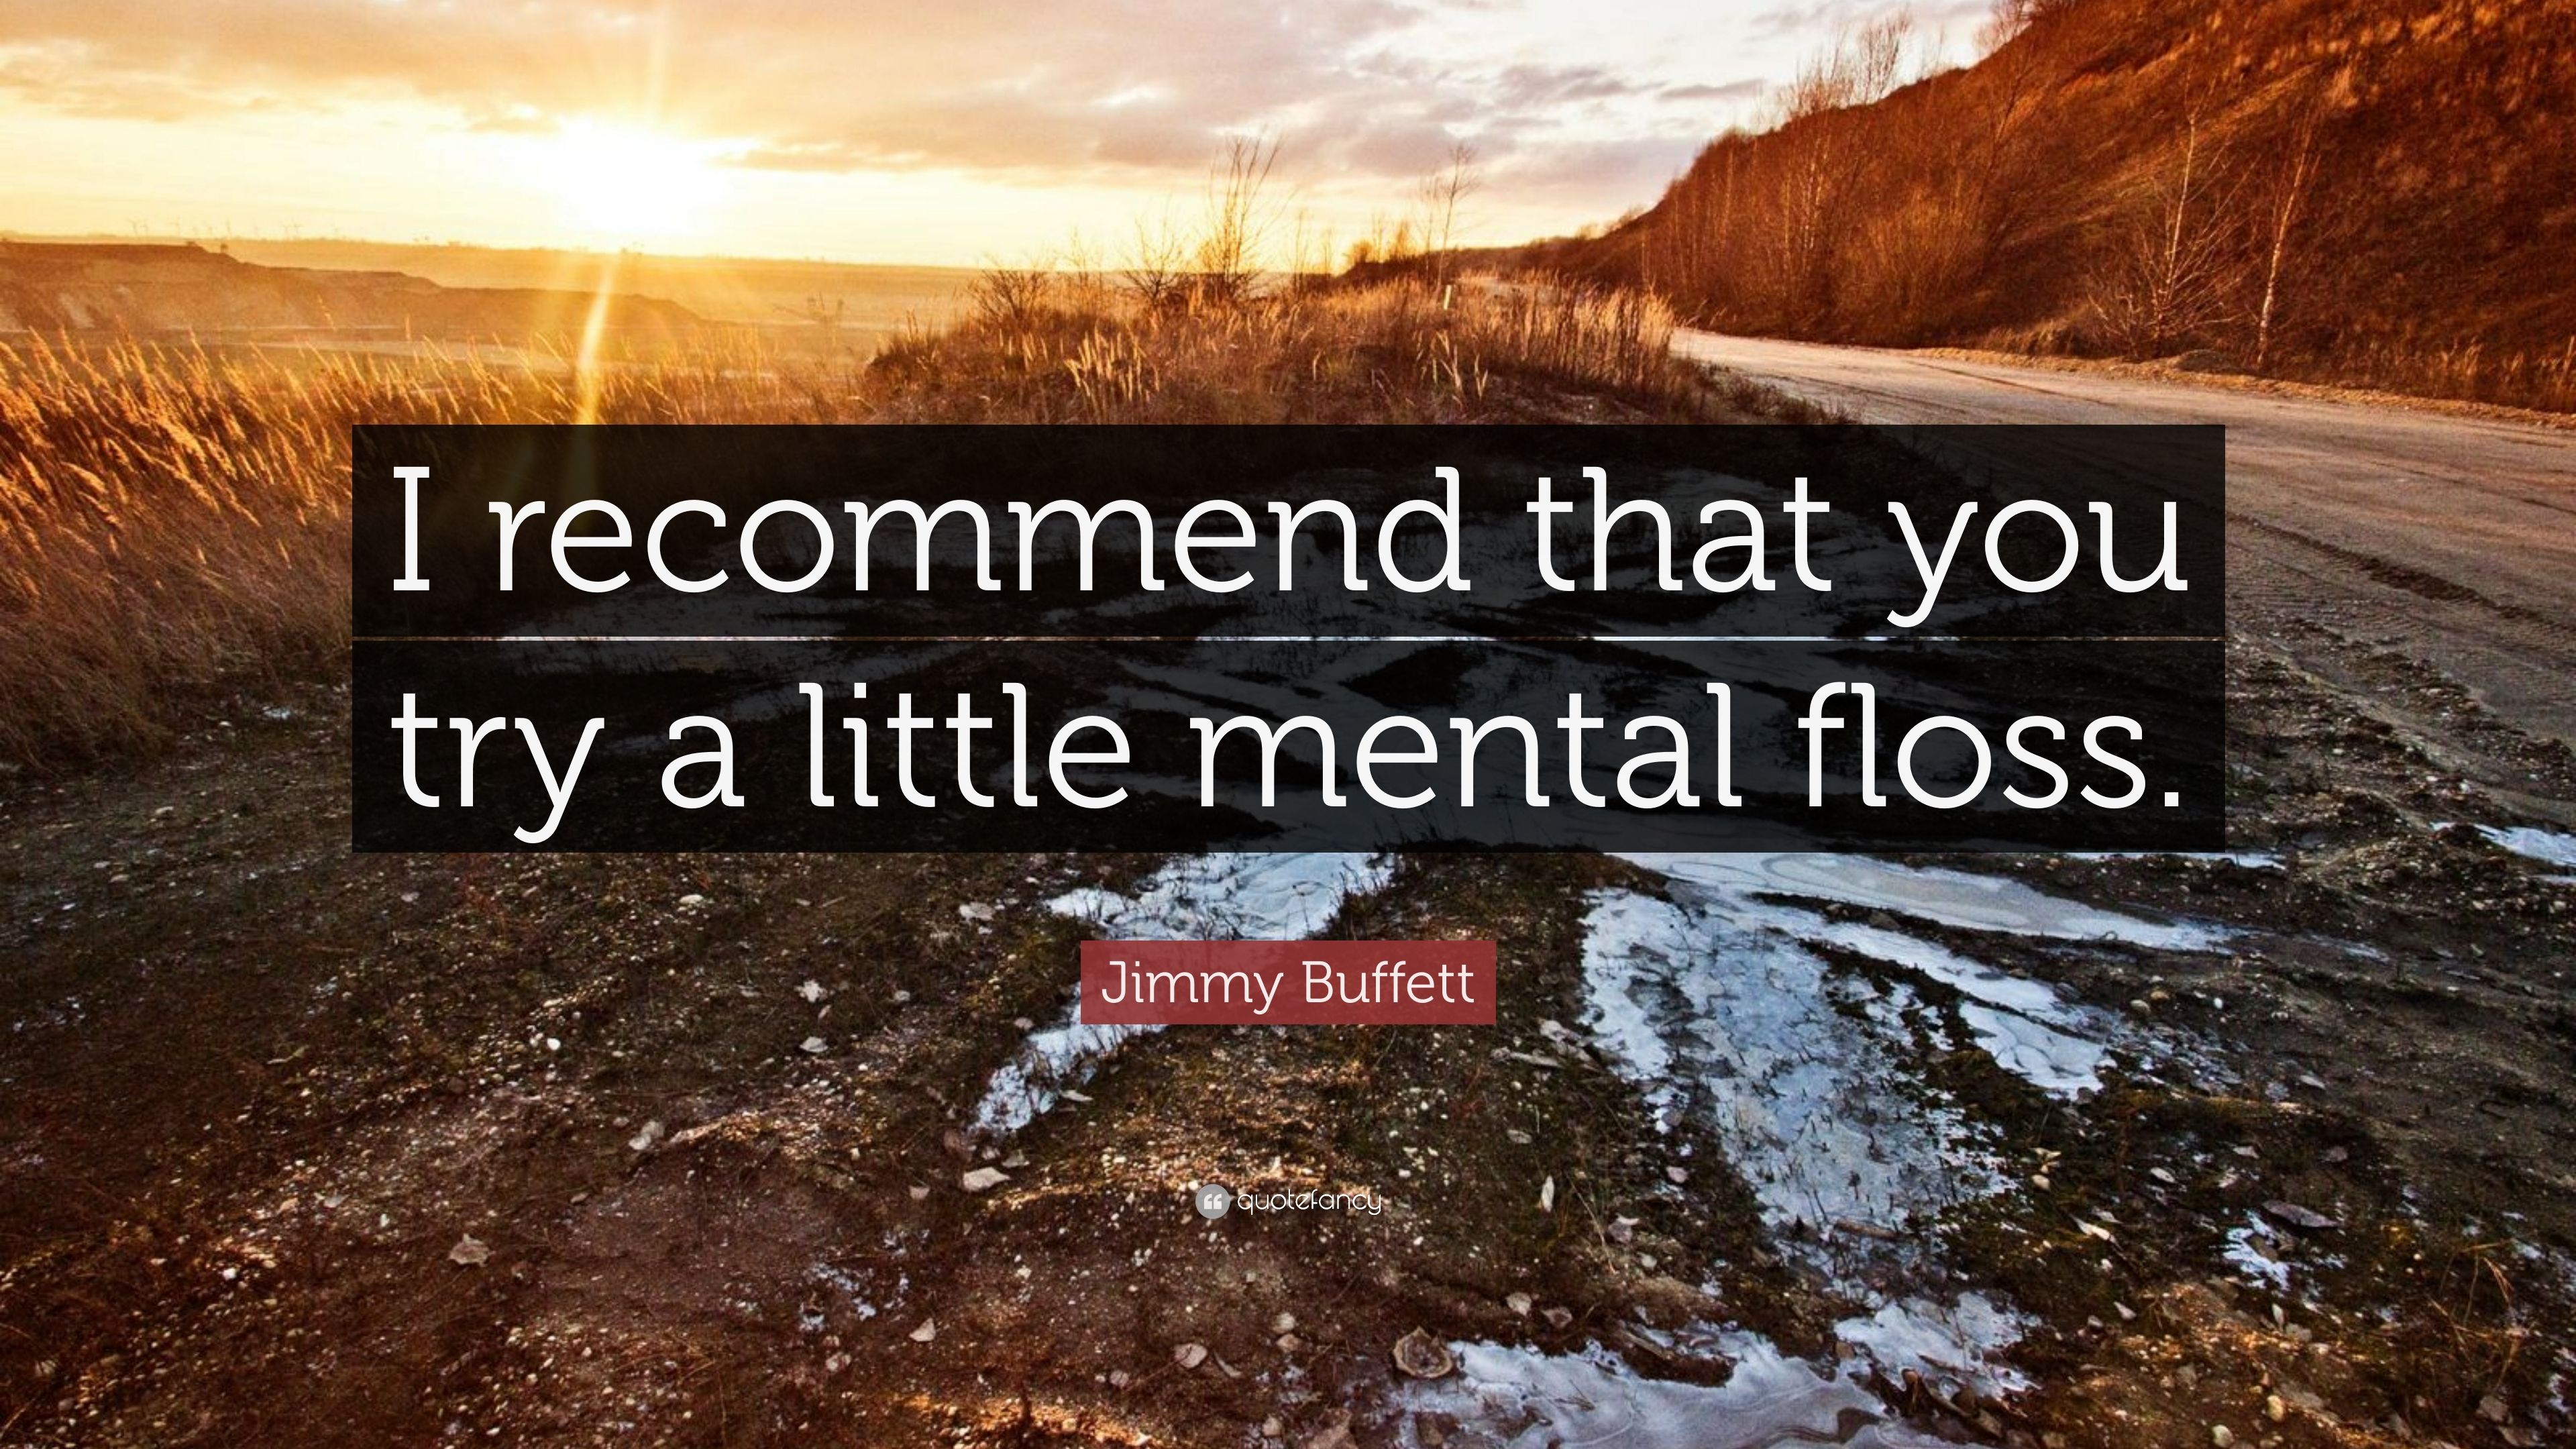 Jimmy Buffett Quote: “I recommend that you try a little mental floss